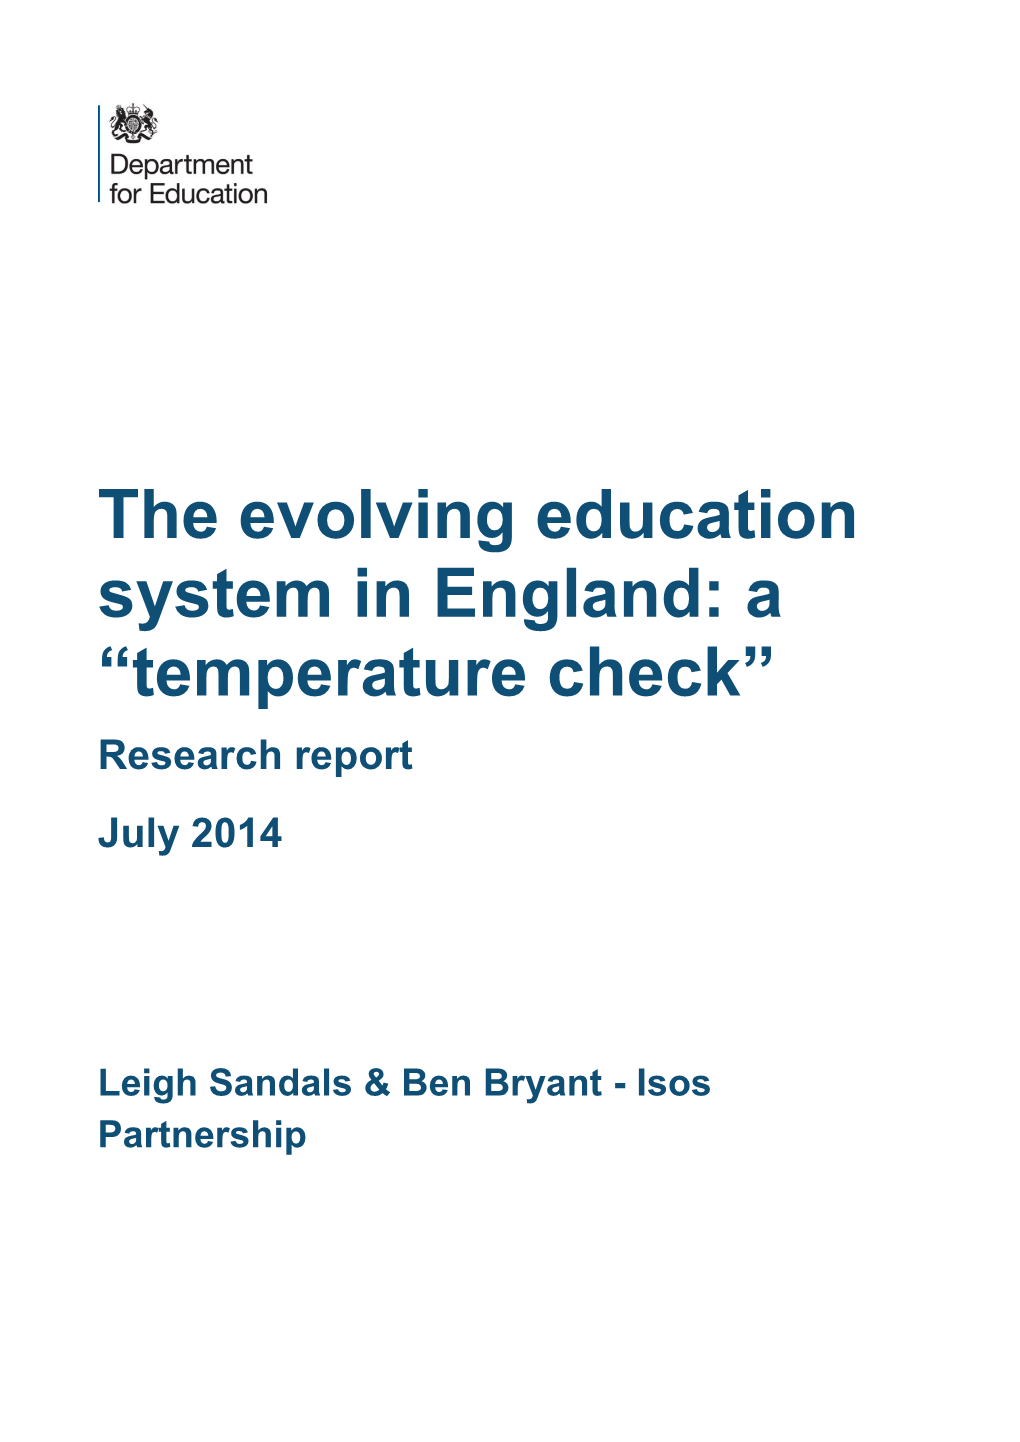 The Evolving Education System in England: a “Temperature Check” Research Report July 2014